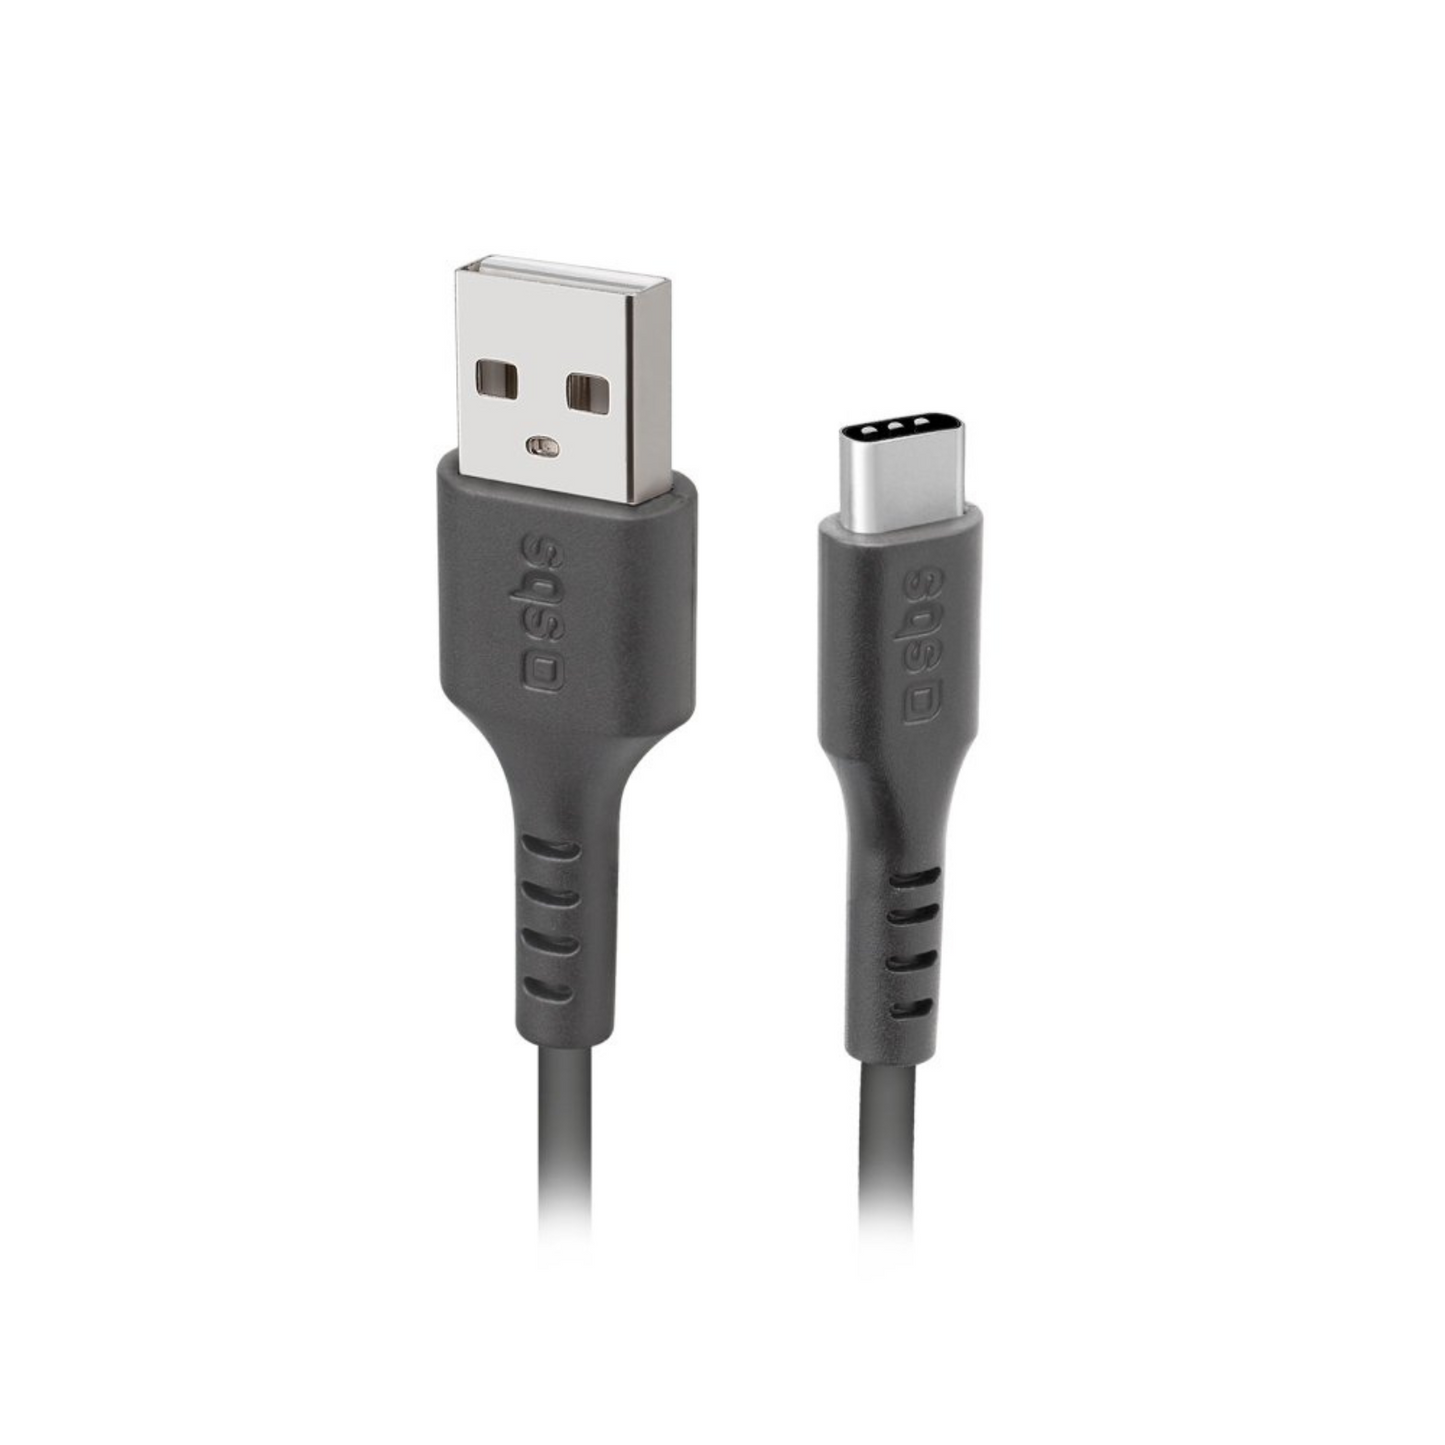 CAVO USB A TYPE-C 2.0.1 MT IN POLYBAG